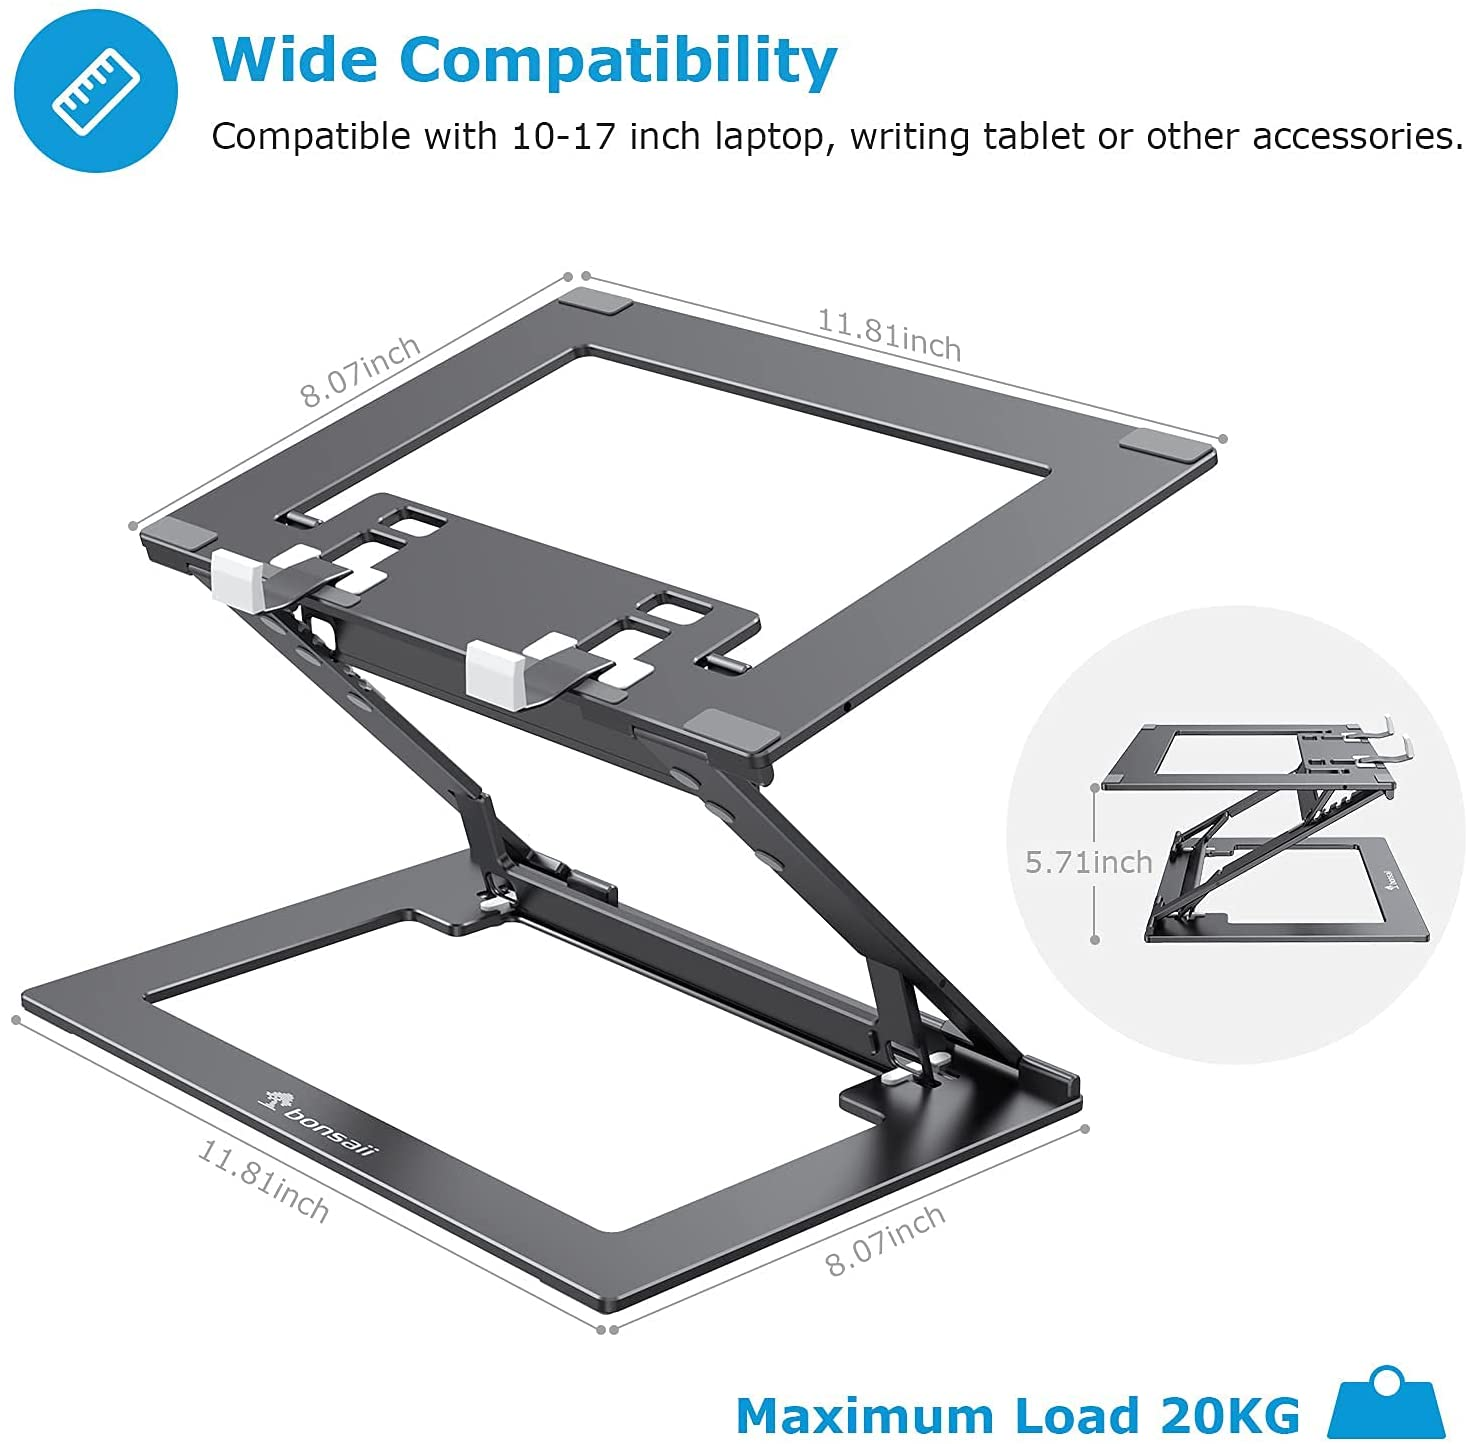 Laptop Stand for Desk, Ergonomic Adjustable Computer Stand for Laptop, Portable Laptop Stand with 15 Angles to Adjust, Support to 44Lbs and Compatible with 10-17Inch Laptop, More Other Accesssories